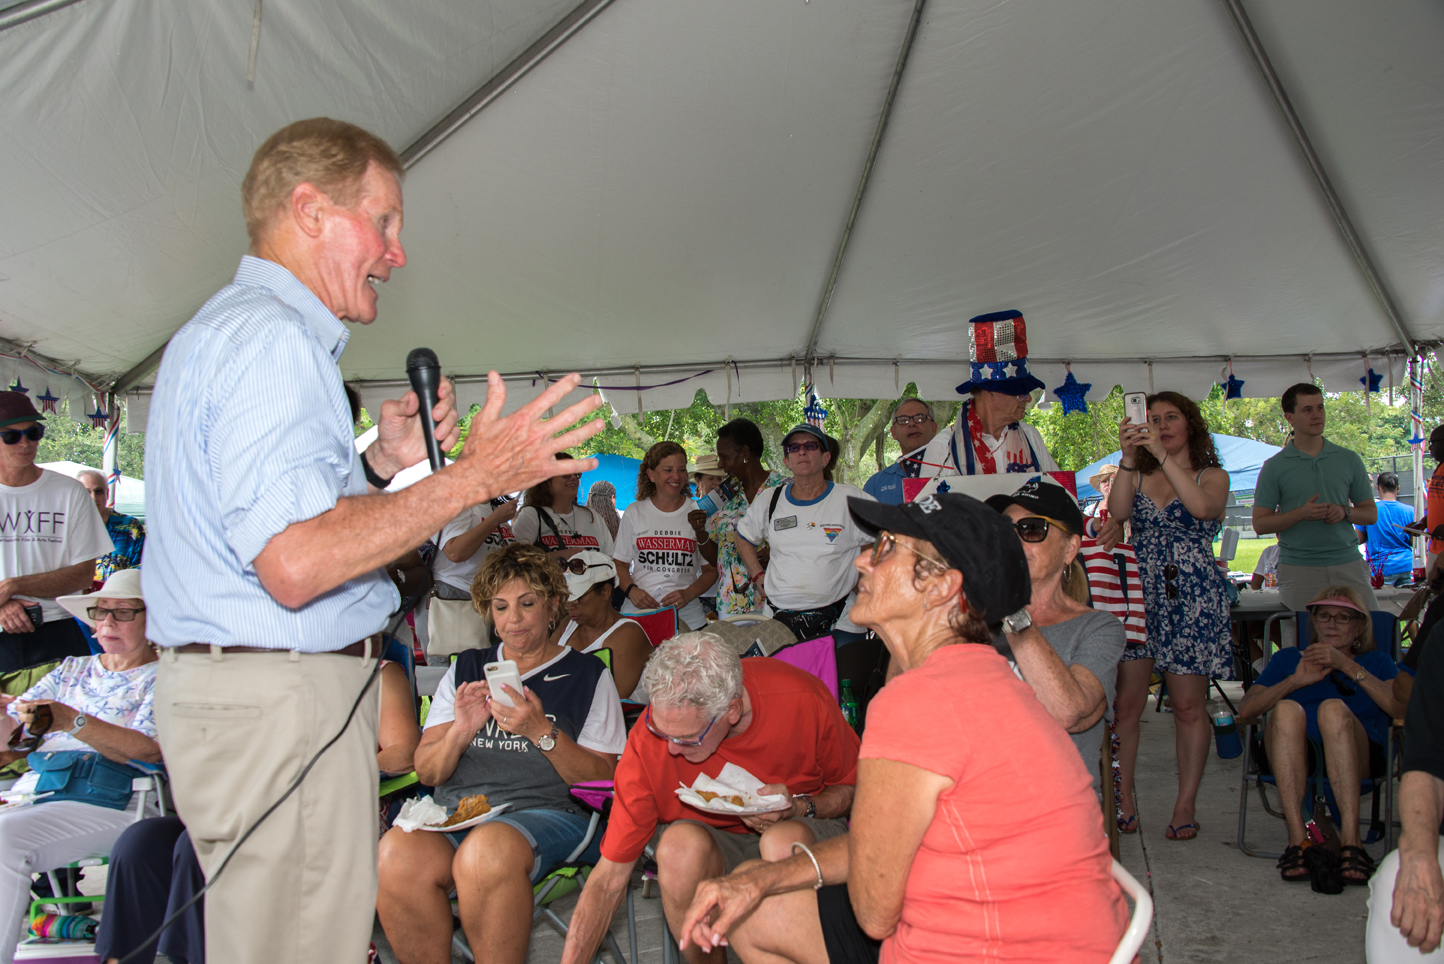 Record Turnout for Democrats at Annual Labor Day Picnic